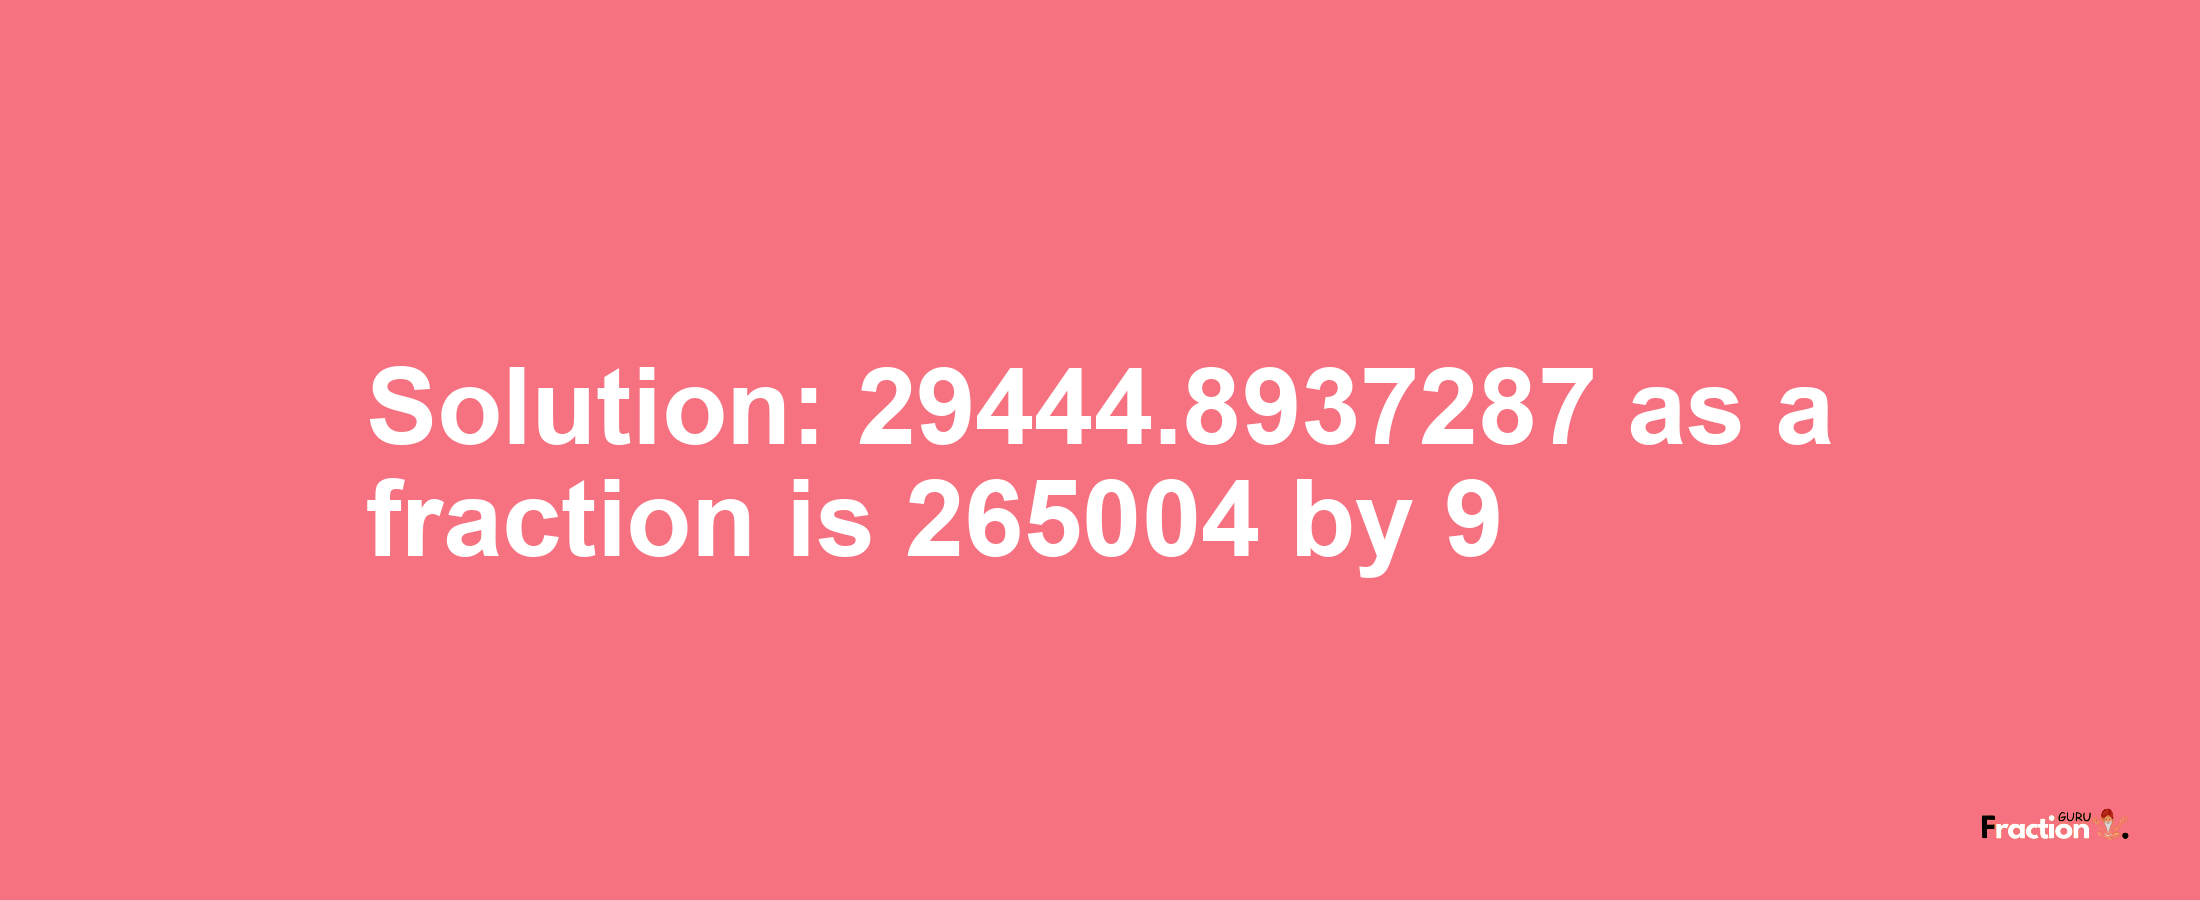 Solution:29444.8937287 as a fraction is 265004/9